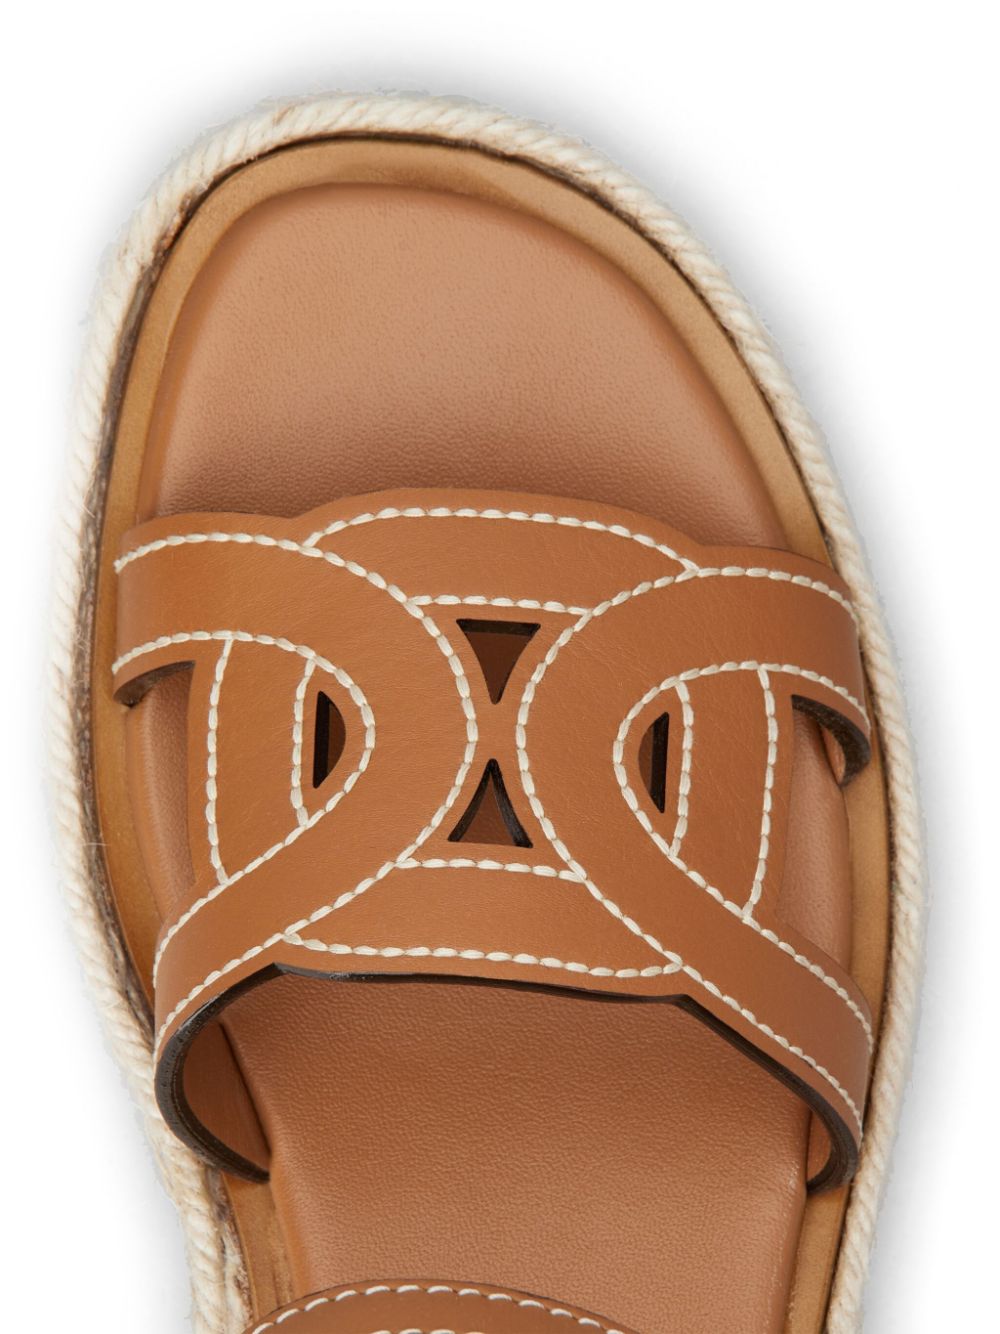 TOD'S Brown Leather Wedge Sandals for Women with Raffia Platform